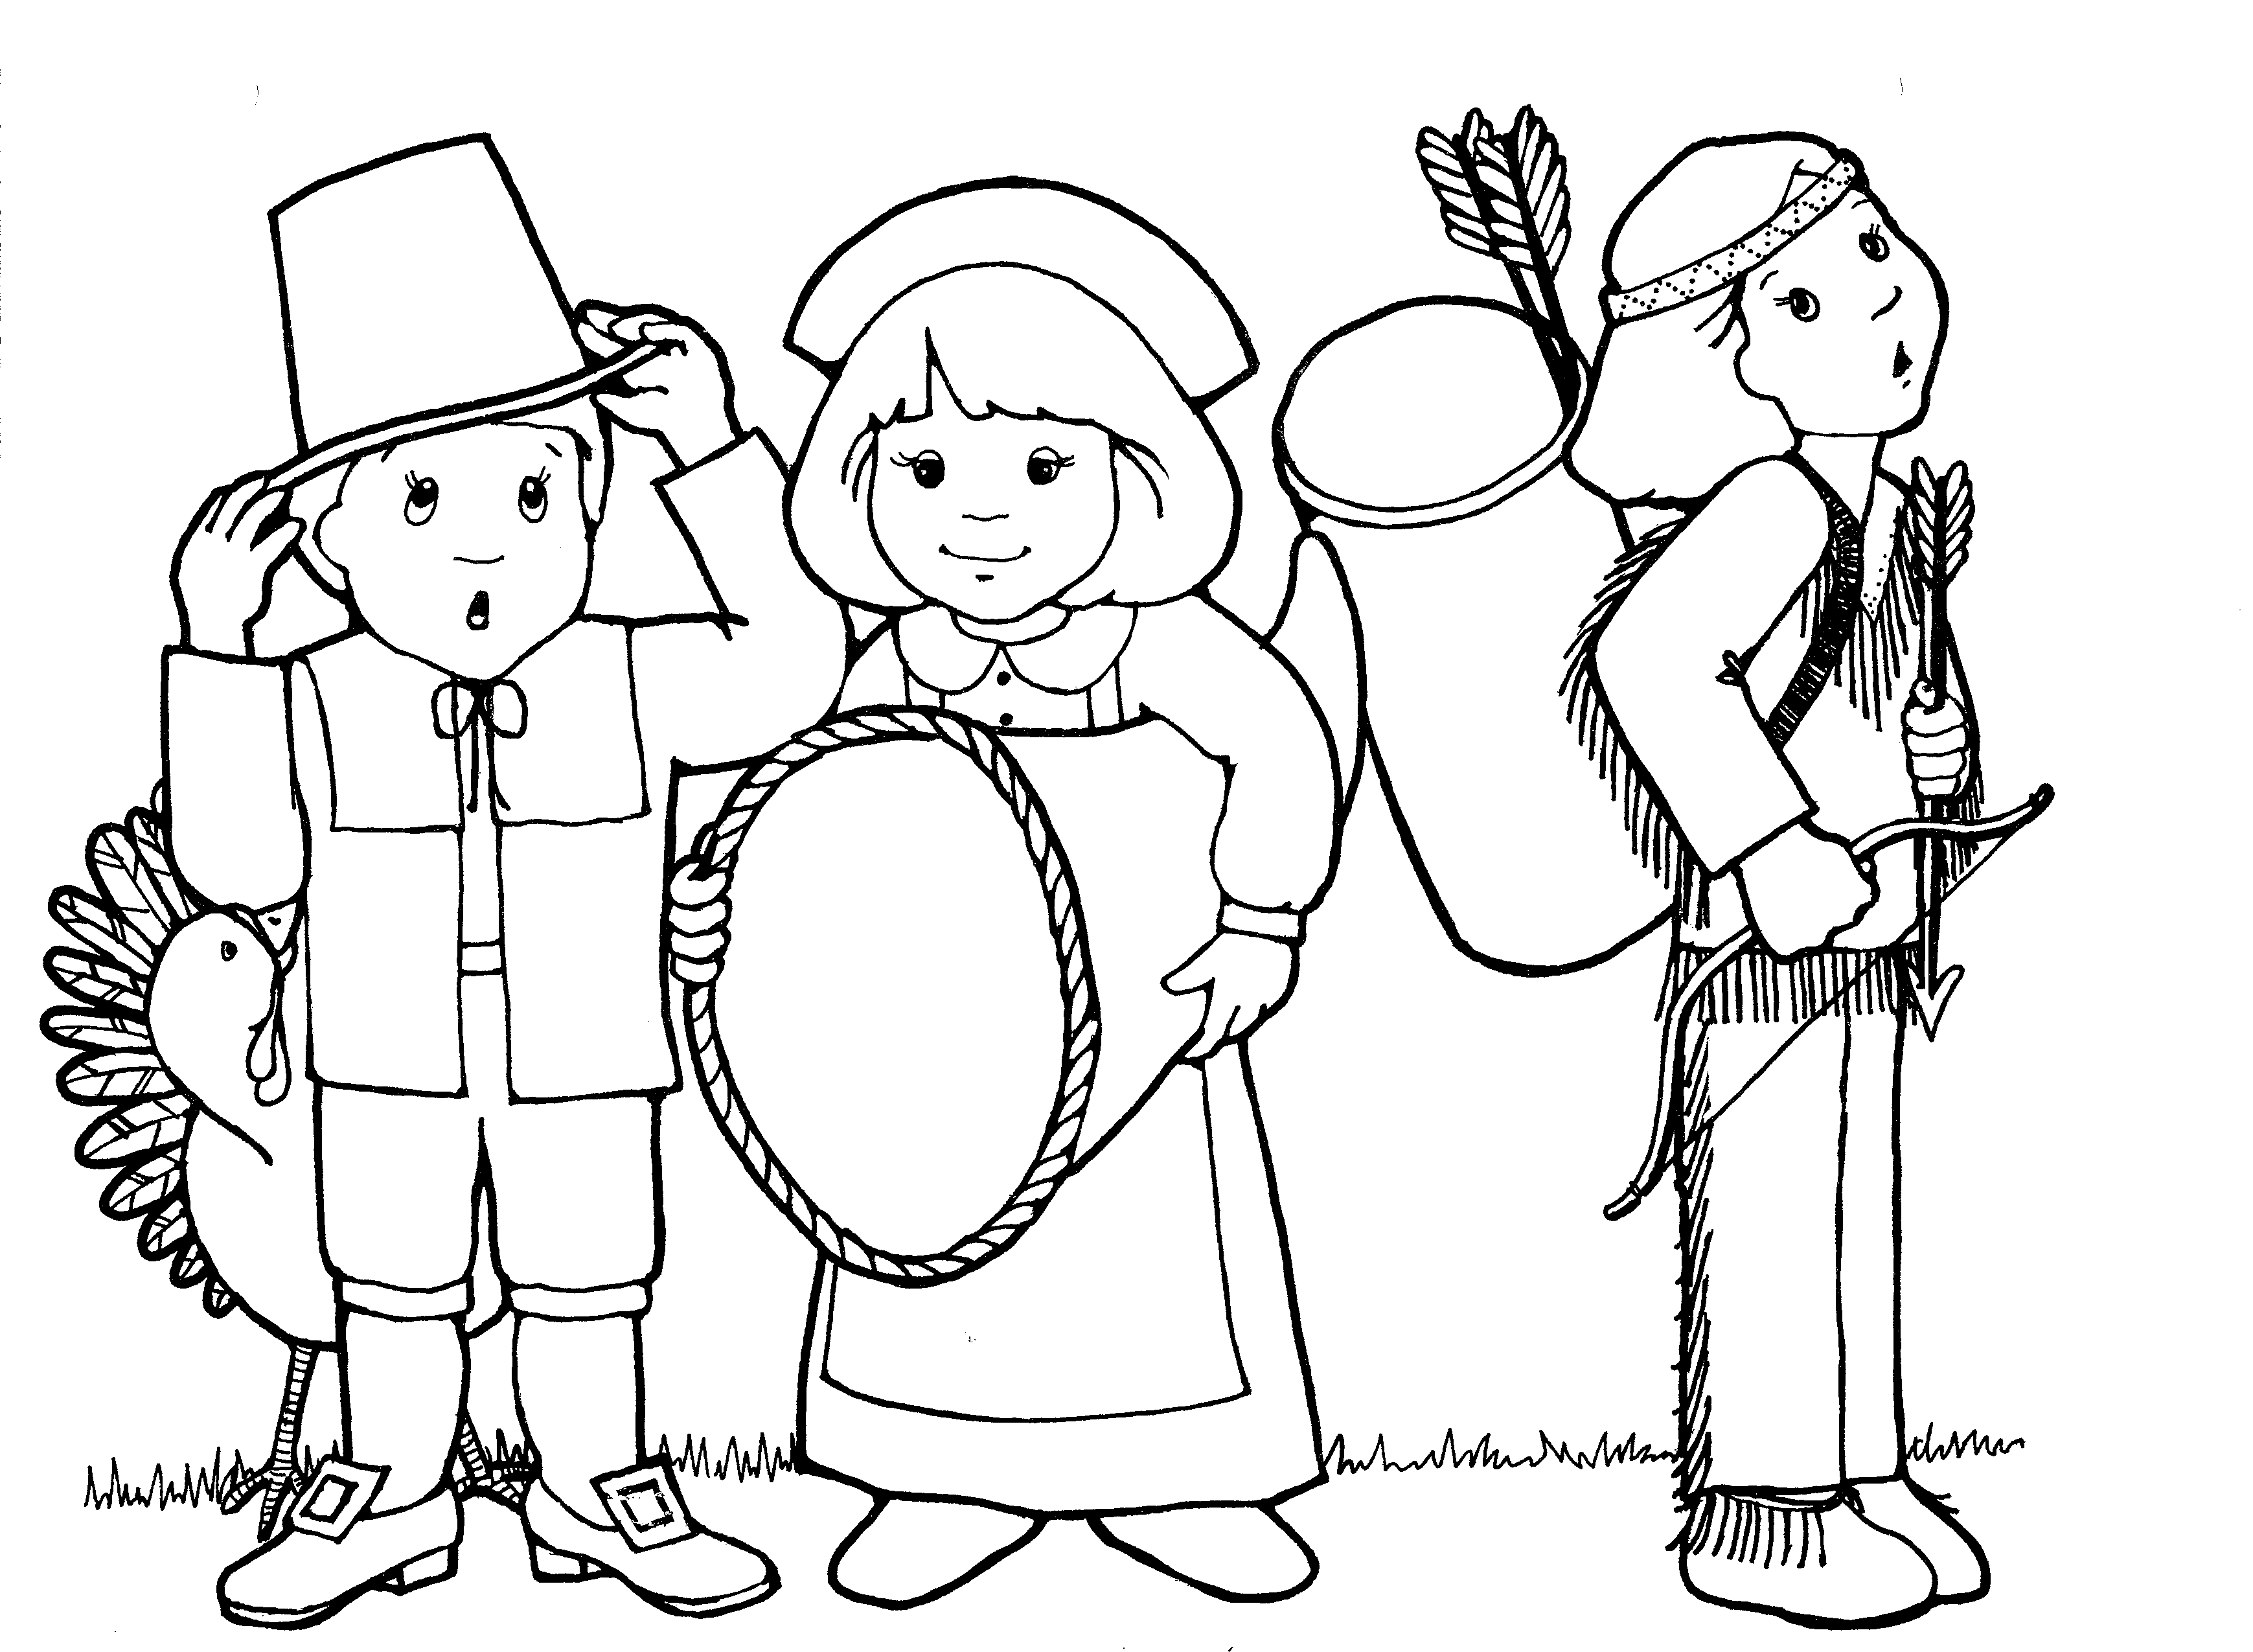 Free Printable Pilgrim Coloring Pages for Kids   Best Coloring ...